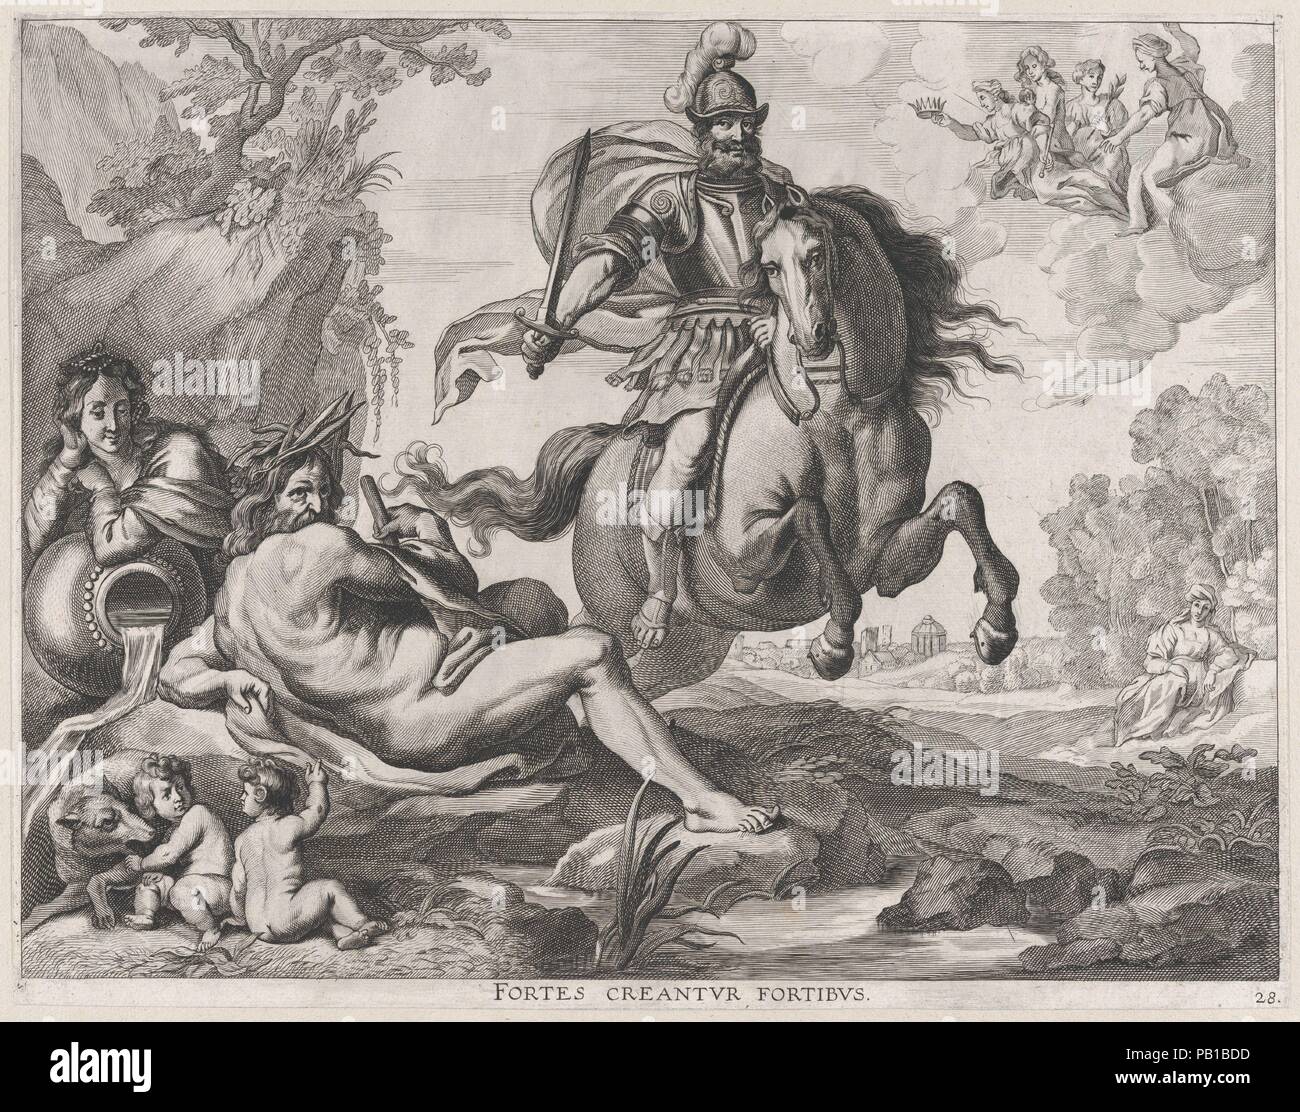 Plate 28: Mars on horseback at center, and Romulus and Remus with the wolf at lower left; from Guillielmus Becanus's 'Serenissimi Principis Ferdinandi, Hispaniarum Infantis...'. Artist: Jacob Neeffs (Flemish, Antwerp 1610-after 1660 Antwerp). Dimensions: Sheet (Trimmed): 11 3/4 × 15 1/16 in. (29.9 × 38.2 cm). Published in: Antwerp. Publisher: Johannes Meursius (Flemish, active 1620-47). Date: 1636.  On January 28, 1635, the city of Ghent celebrated the entry of Cardinal-Infante Ferdinand of Spain, the recently appointed governor of the Southern Netherlands. A group of Flemish artists were comm Stock Photo